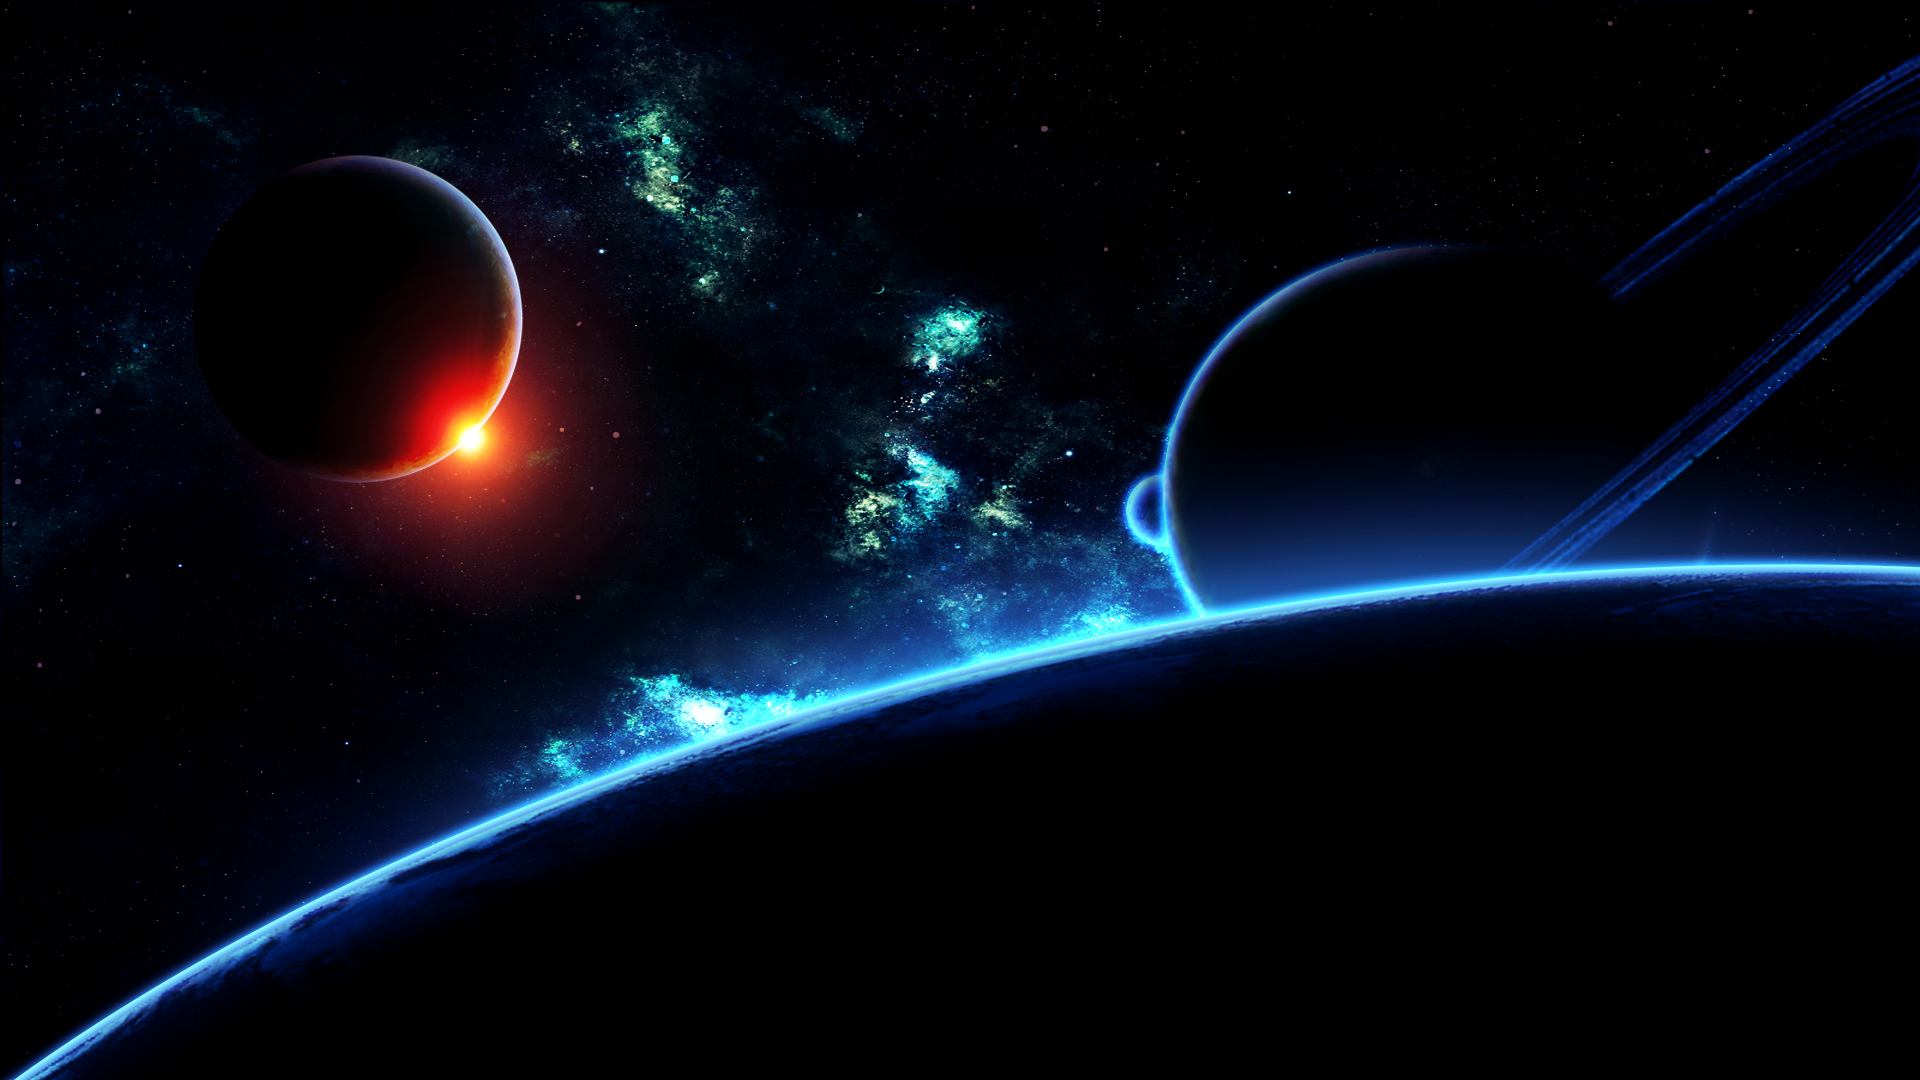 Black Wallpaper With Space Scenery And Image